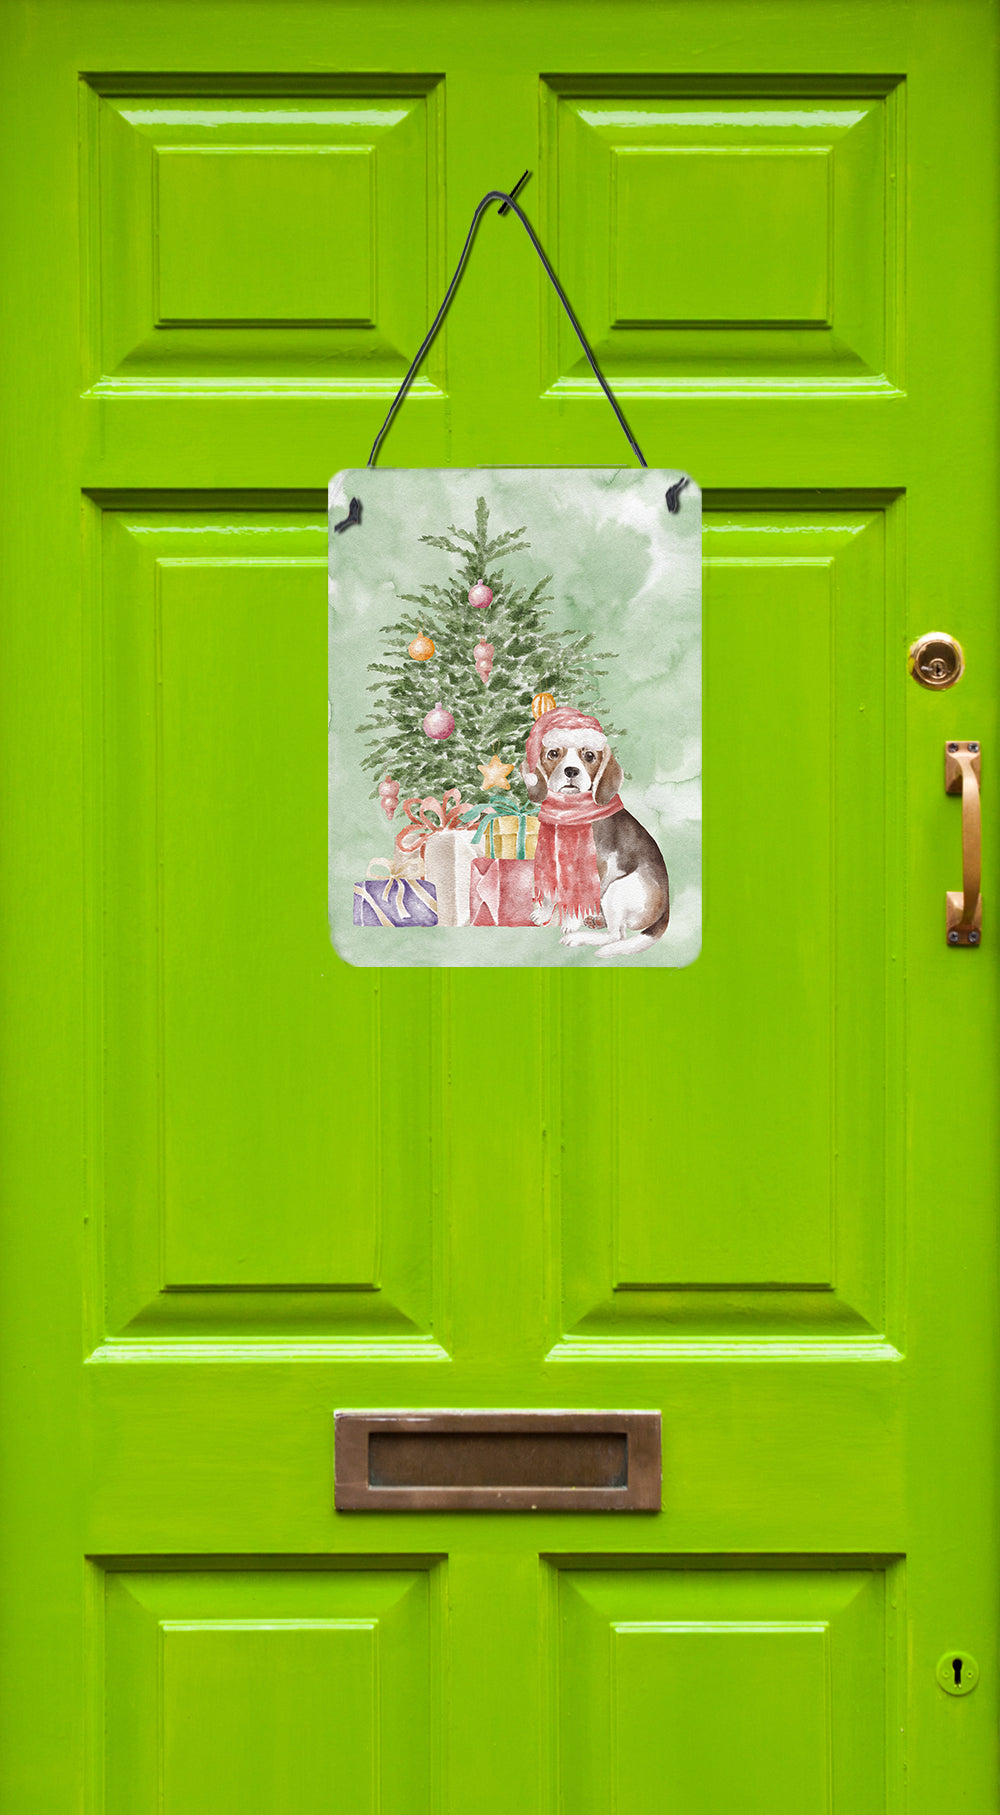 Buy this Christmas Beagle Puppy Wall or Door Hanging Prints